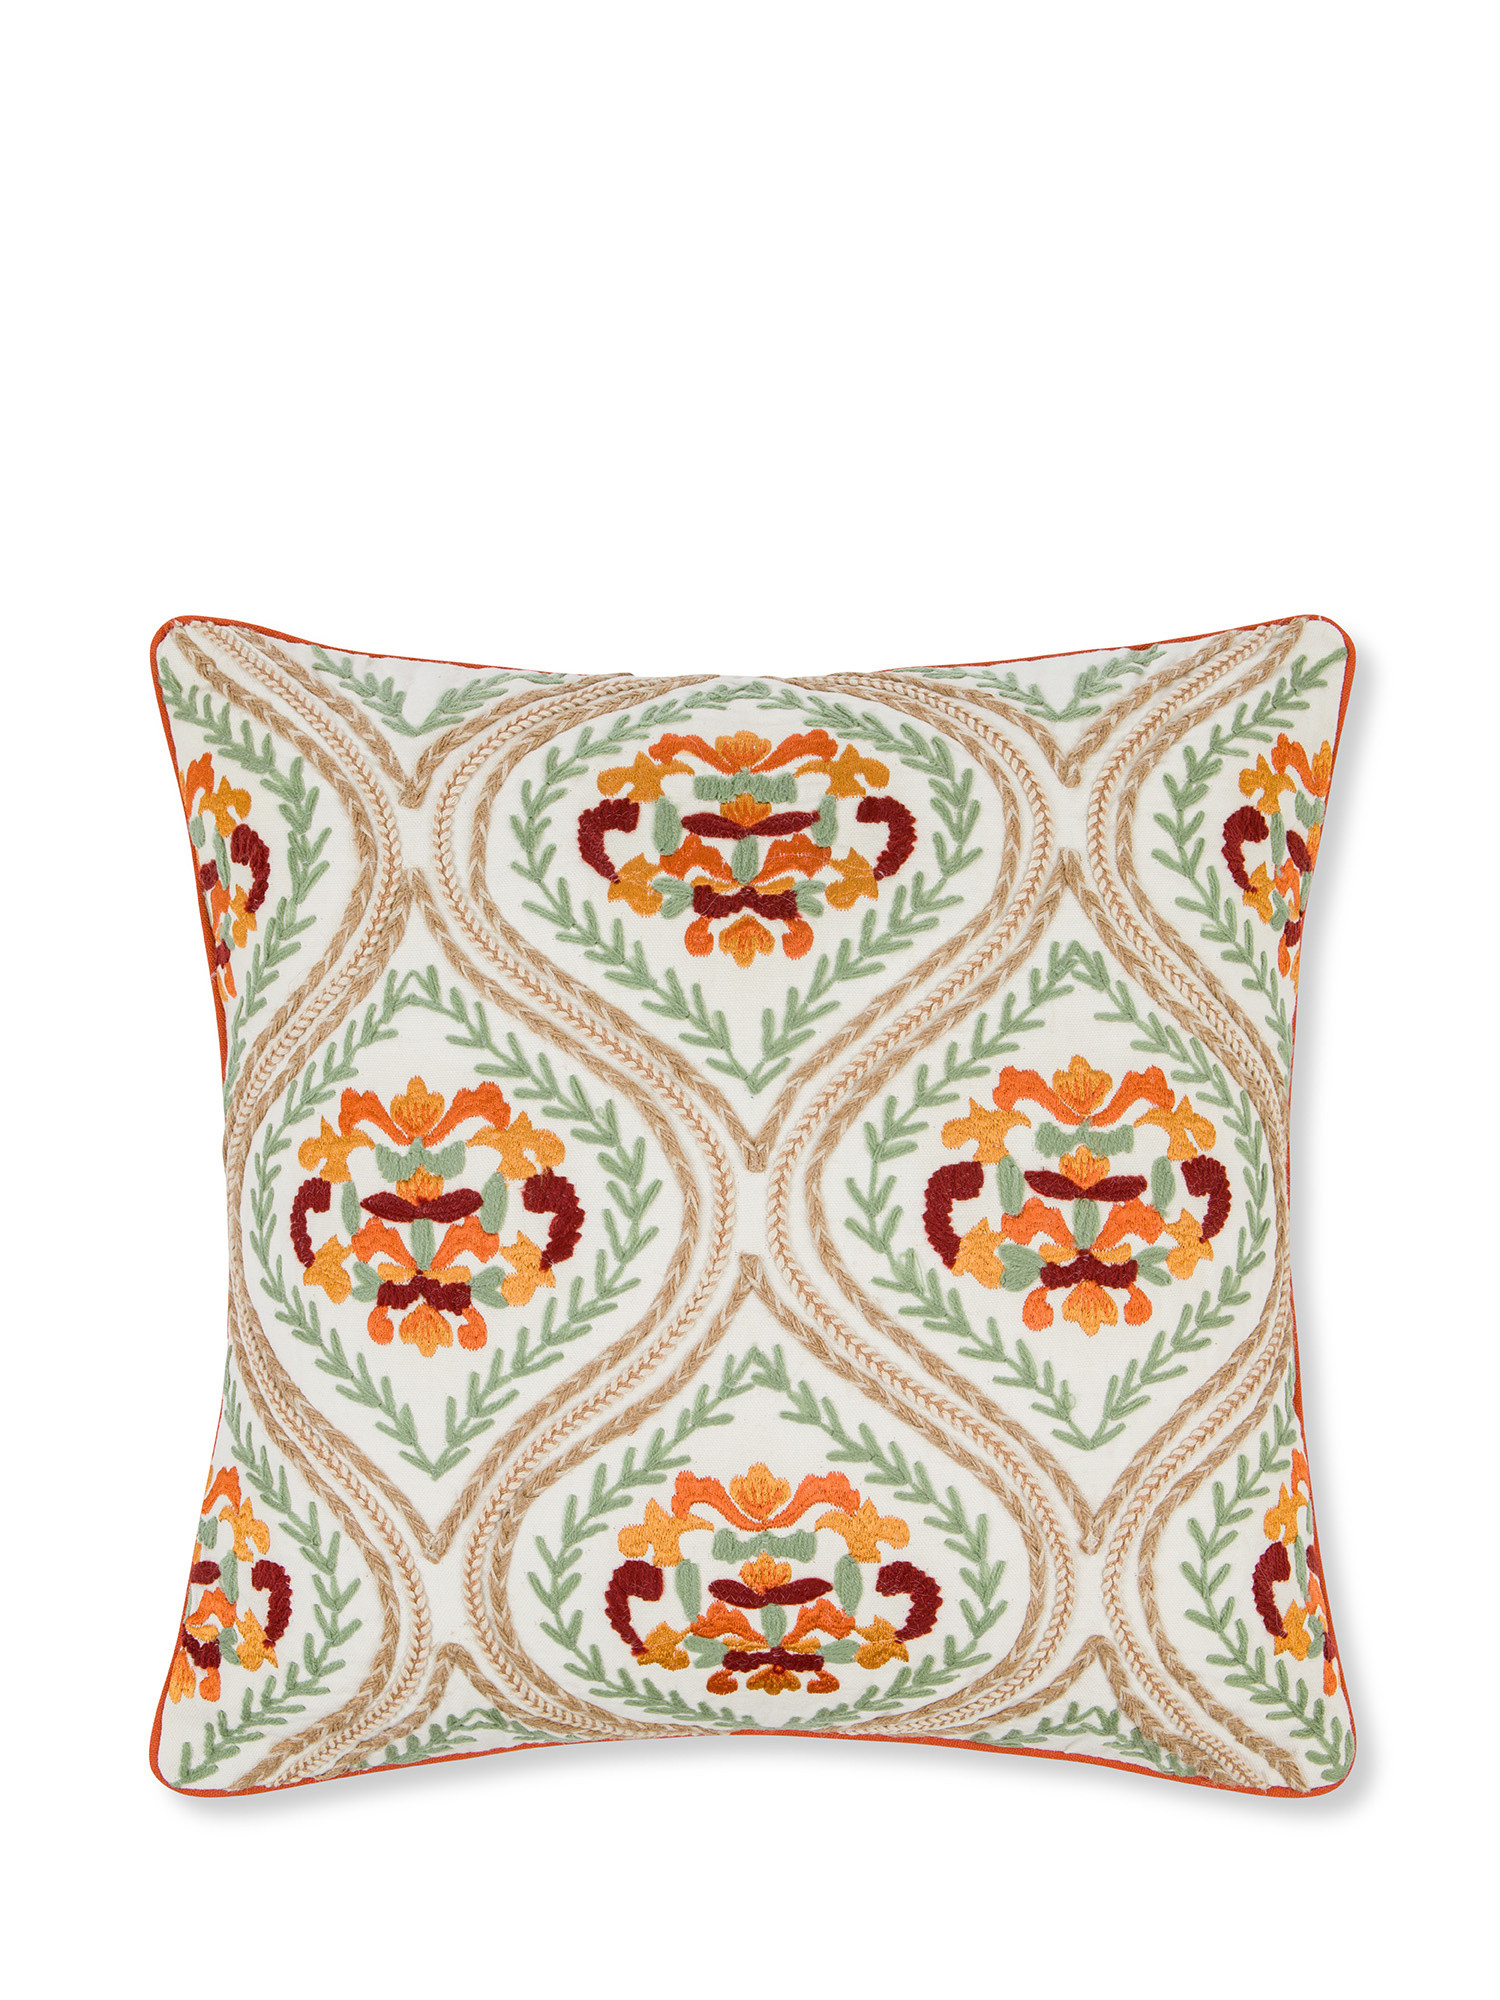 Embroidered cushion with Folk pattern 45x45cm, Multicolor, large image number 0